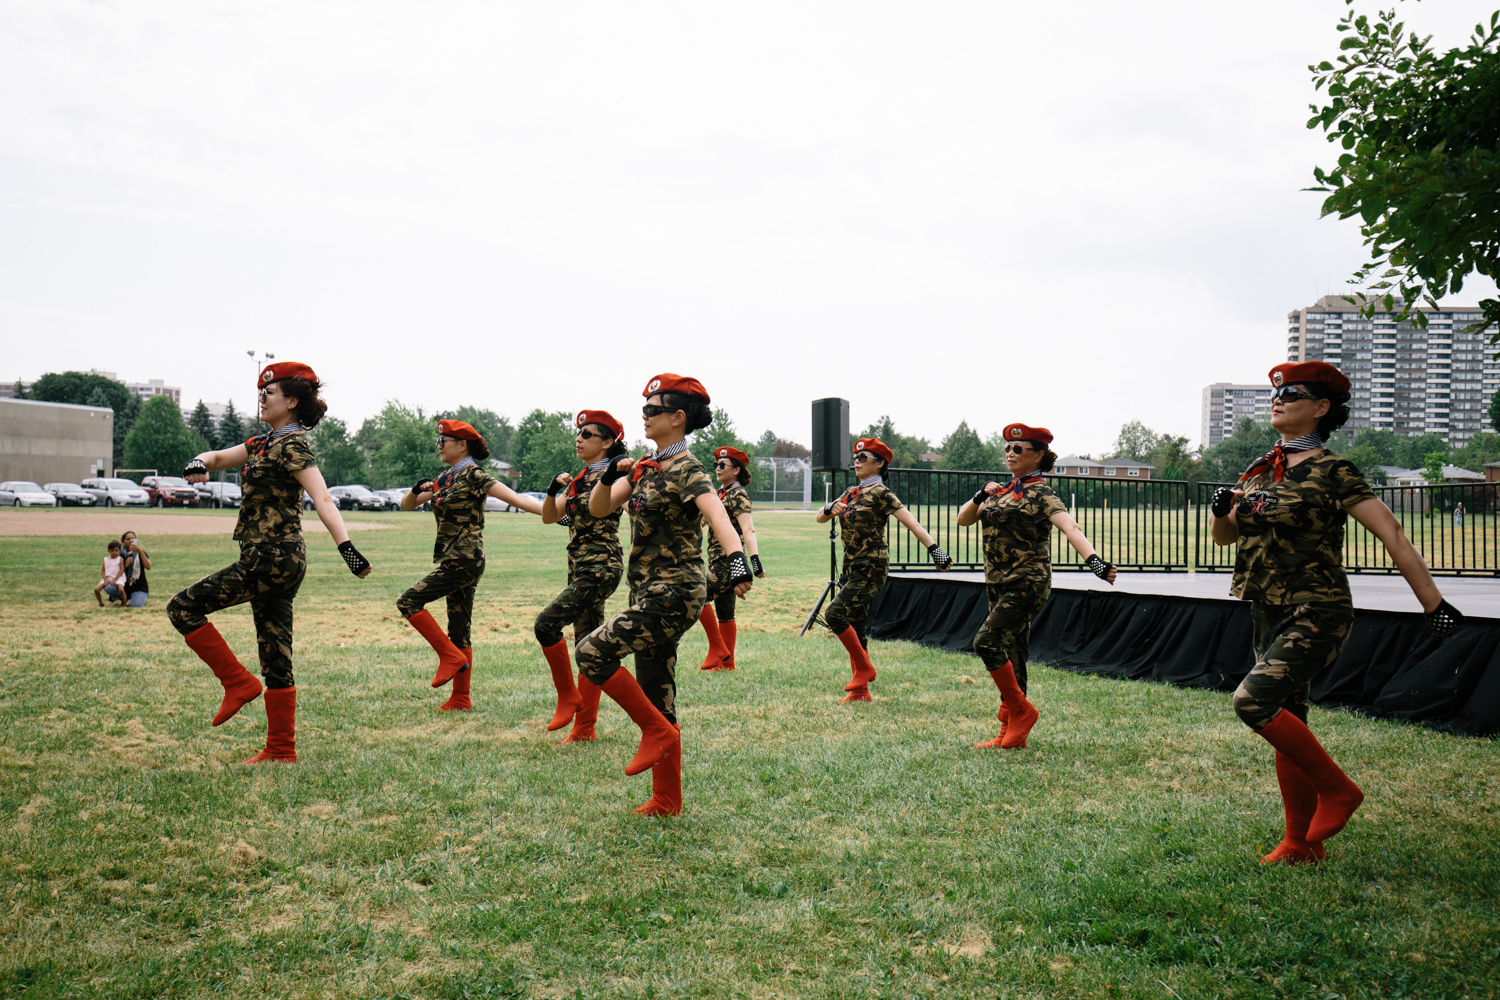 A group of seven dancers in dark costumes and red boots dance on the grass in front of the stage.